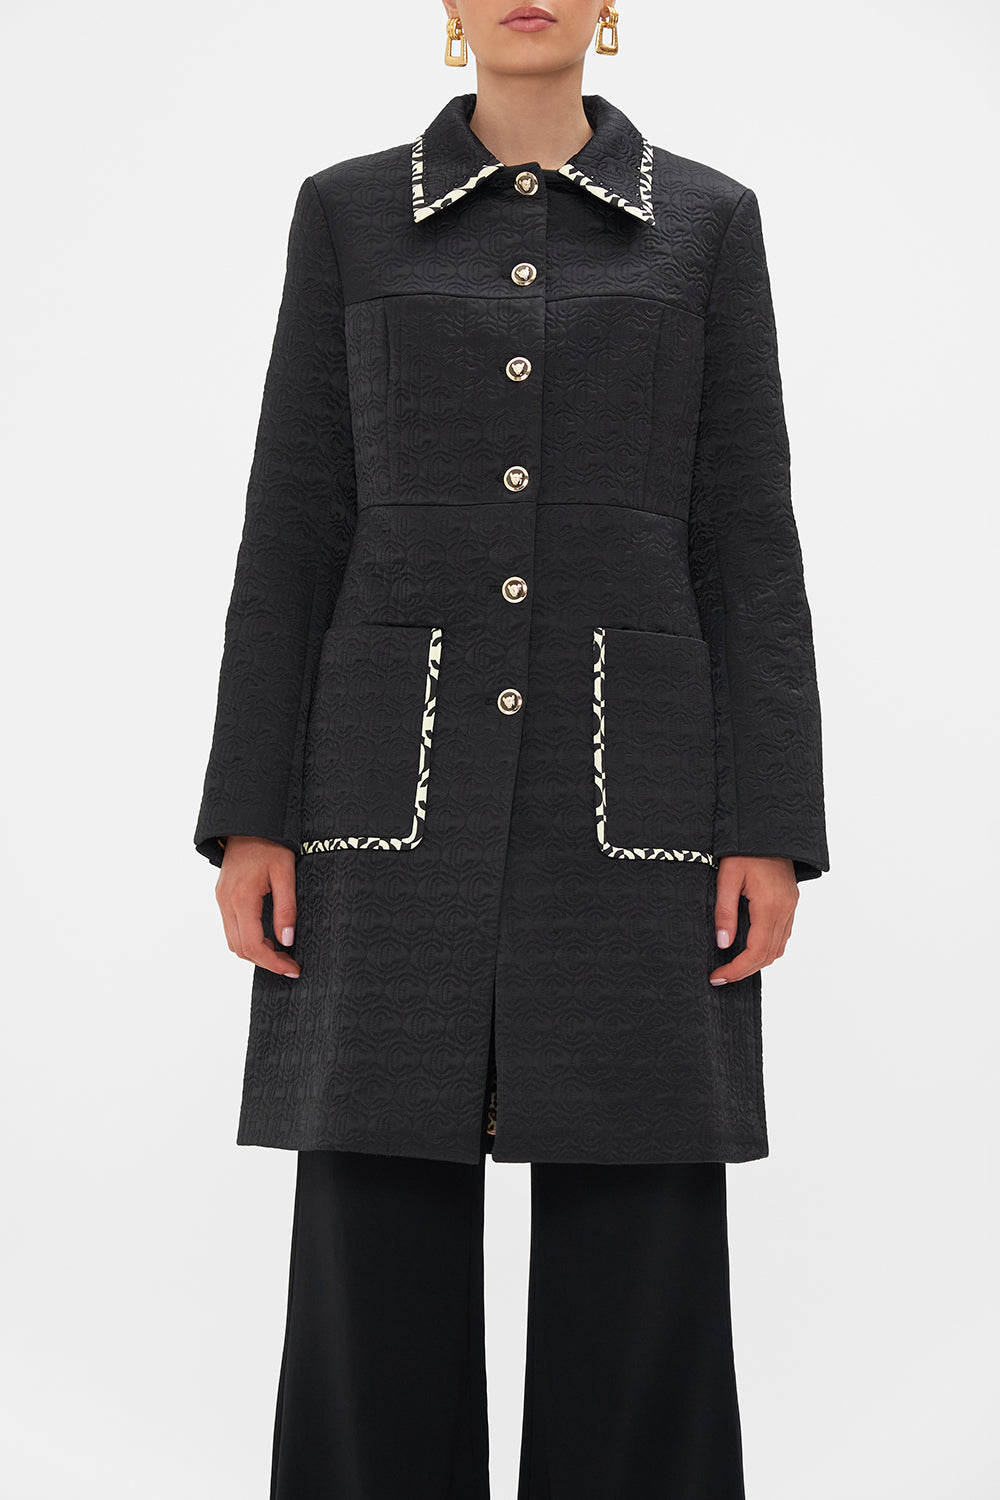 BUTTON FRONT COAT CIAO PALAZZO